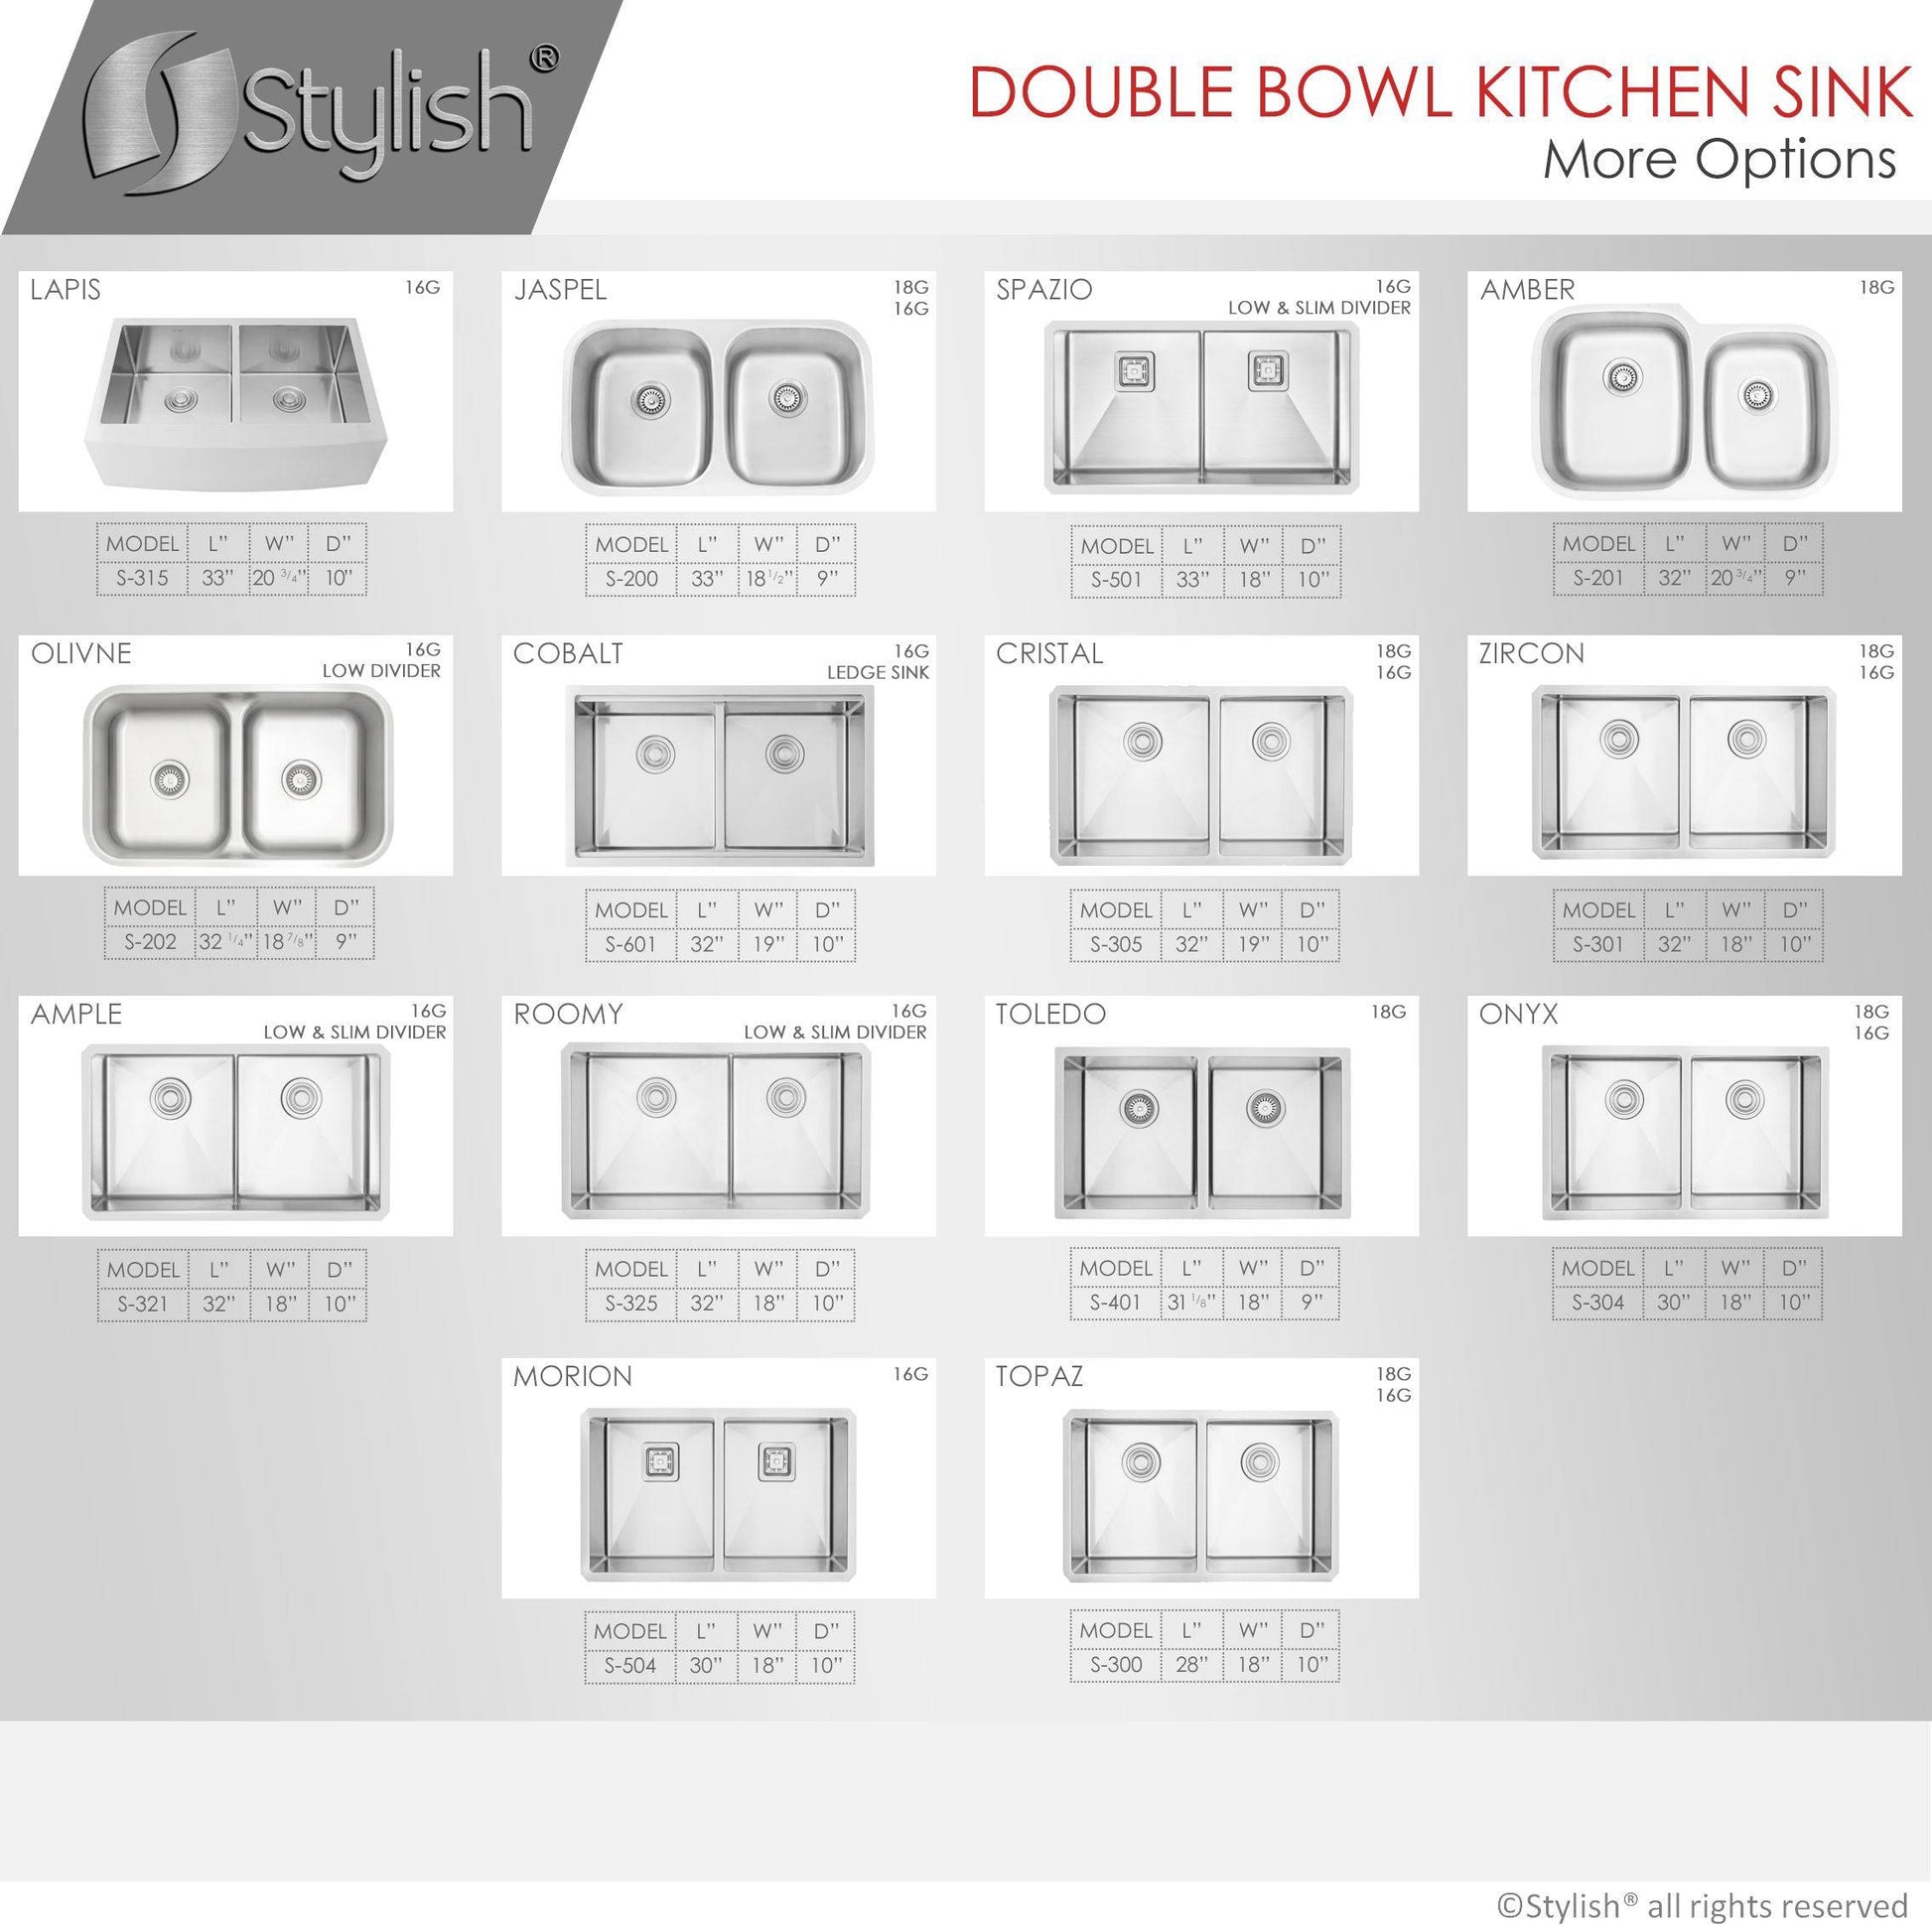 Stylish Morion 30" x 18" Double Bowl Stainless Steel Kitchen Sink with Square Strainers S-504XG - Renoz